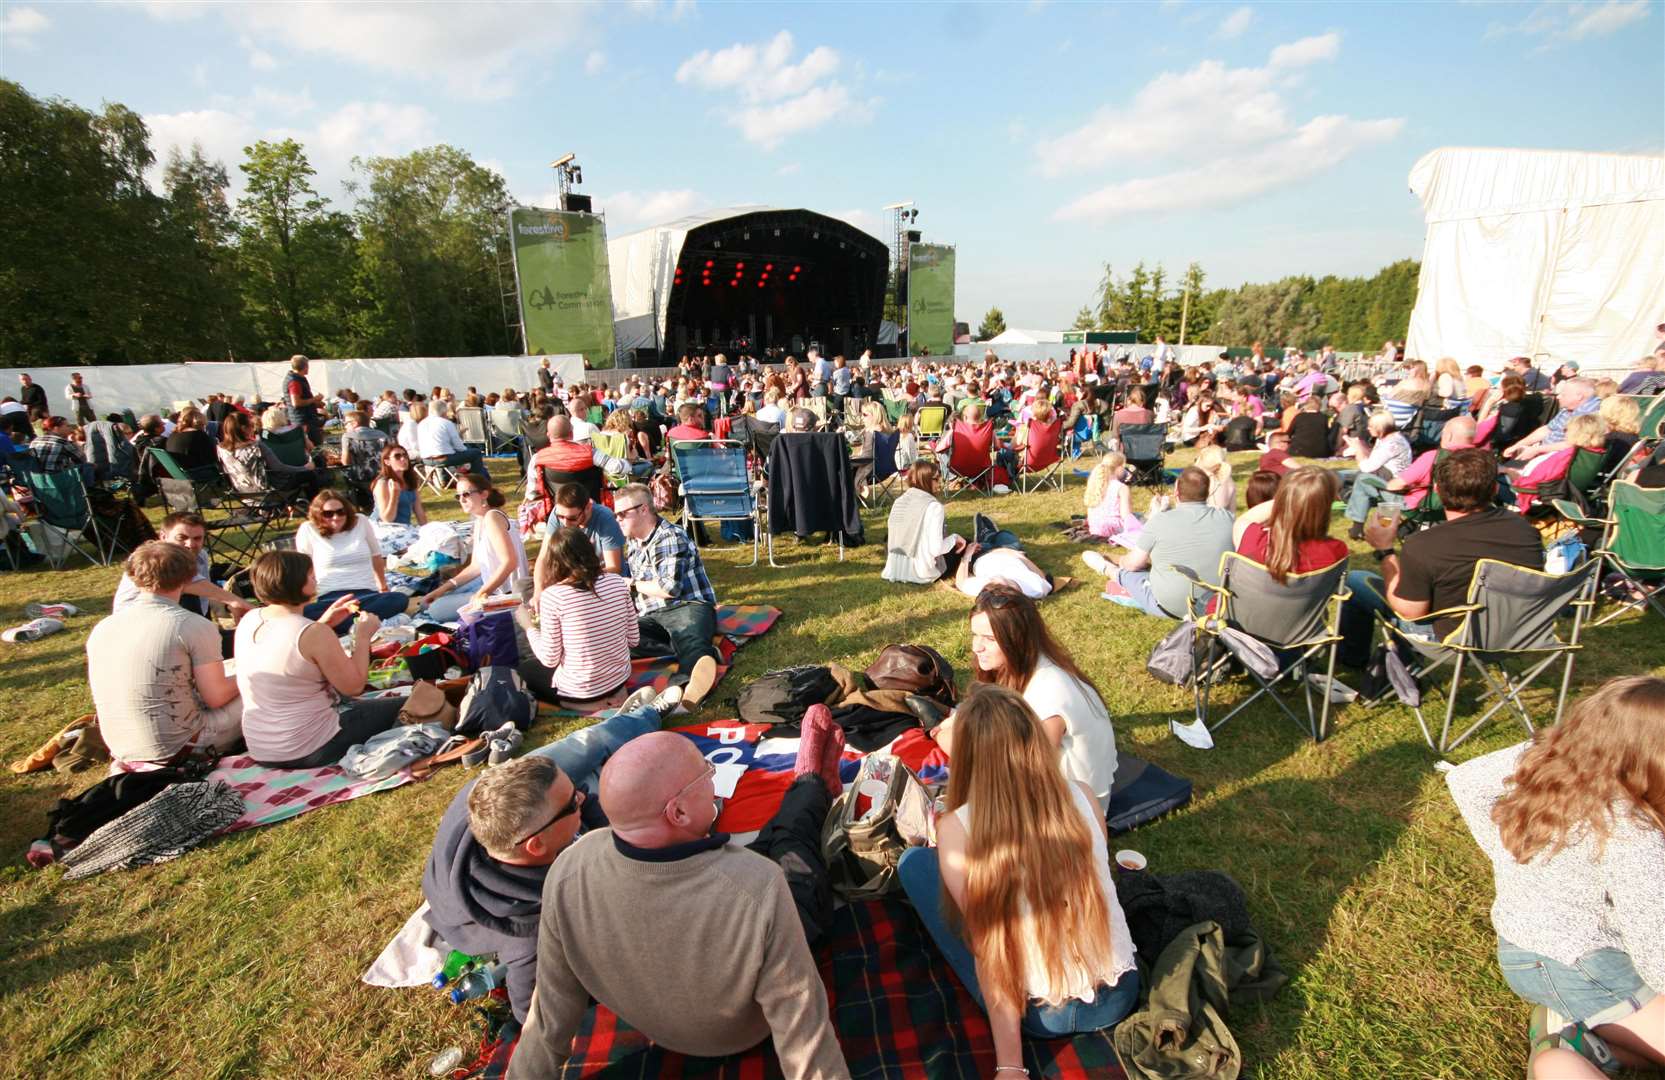 Bedgebury Pinetum hosts the Forest Live concerts